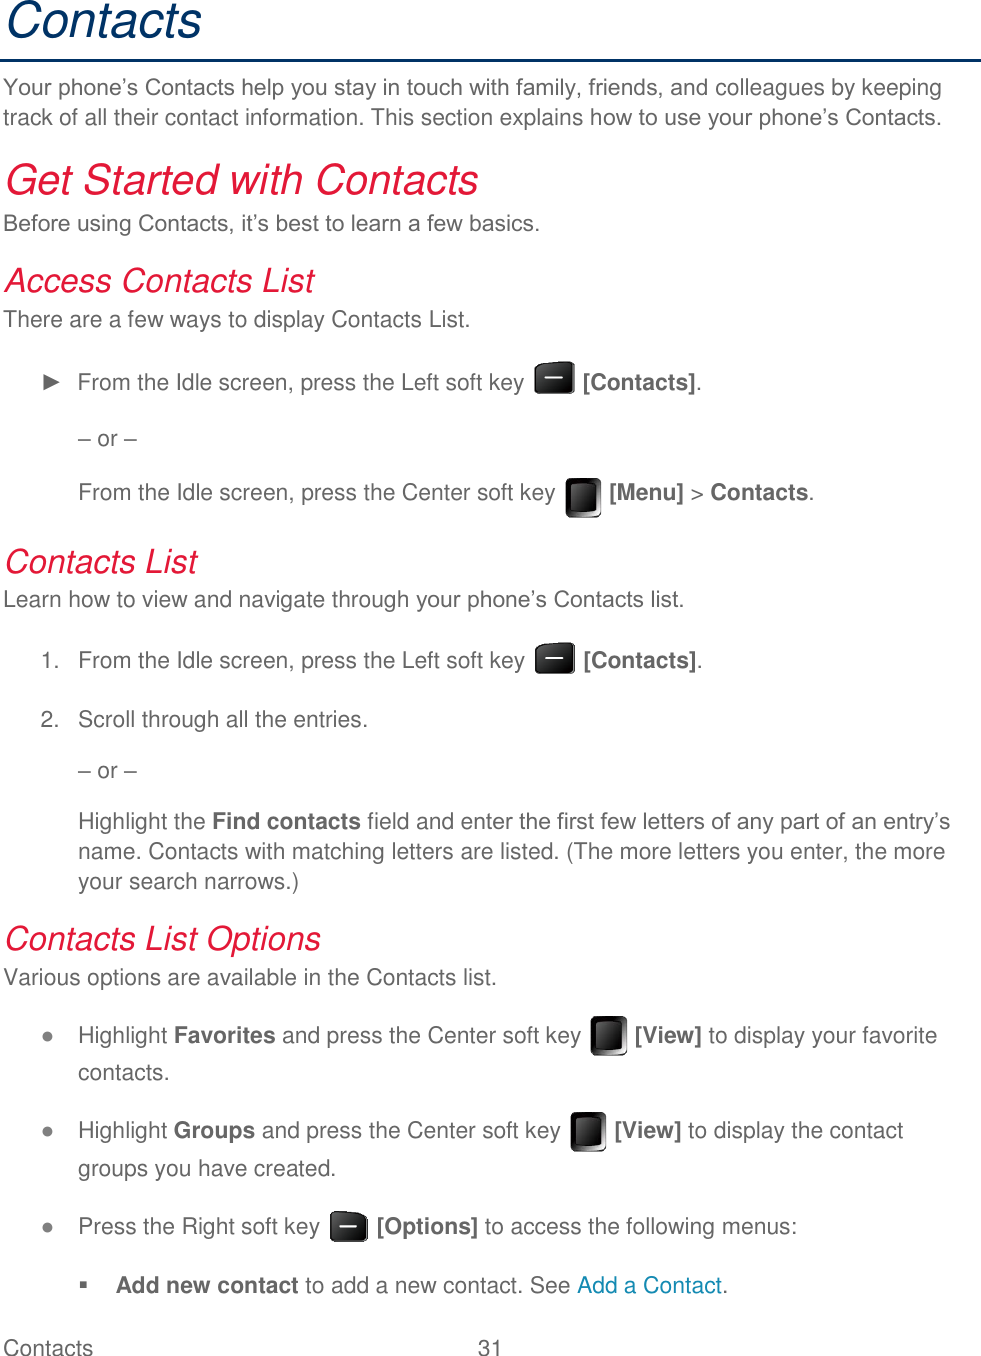 Contacts  31   Contacts Your phone’s Contacts help you stay in touch with family, friends, and colleagues by keeping track of all their contact information. This section explains how to use your phone’s Contacts. Get Started with Contacts  Before using Contacts, it’s best to learn a few basics.  Access Contacts List There are a few ways to display Contacts List. ►  From the Idle screen, press the Left soft key   [Contacts]. – or – From the Idle screen, press the Center soft key   [Menu] &gt; Contacts. Contacts List Learn how to view and navigate through your phone’s Contacts list.   From the Idle screen, press the Left soft key   [Contacts]. 1.  Scroll through all the entries. 2.– or – Highlight the Find contacts field and enter the first few letters of any part of an entry’s name. Contacts with matching letters are listed. (The more letters you enter, the more your search narrows.) Contacts List Options Various options are available in the Contacts list. ● Highlight Favorites and press the Center soft key   [View] to display your favorite contacts. ● Highlight Groups and press the Center soft key   [View] to display the contact groups you have created. ● Press the Right soft key   [Options] to access the following menus:  Add new contact to add a new contact. See Add a Contact. 